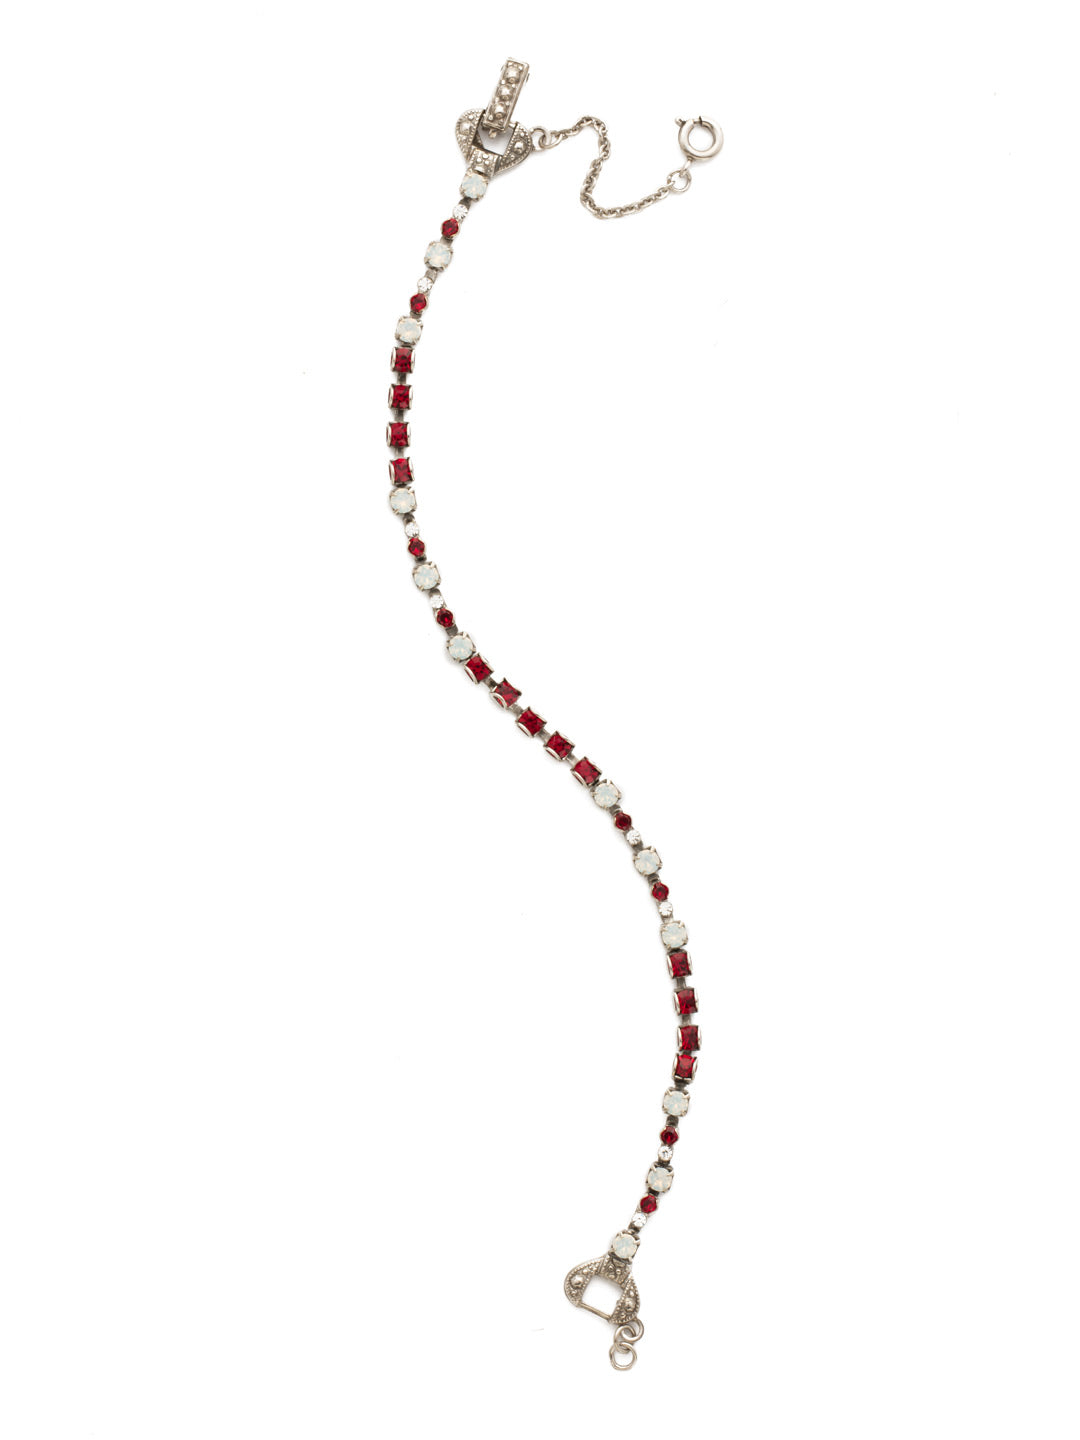 The Skinny Bracelet - BDU45ASCP - Petite round crystals in a variety of settings align to form this sleek, slender style.